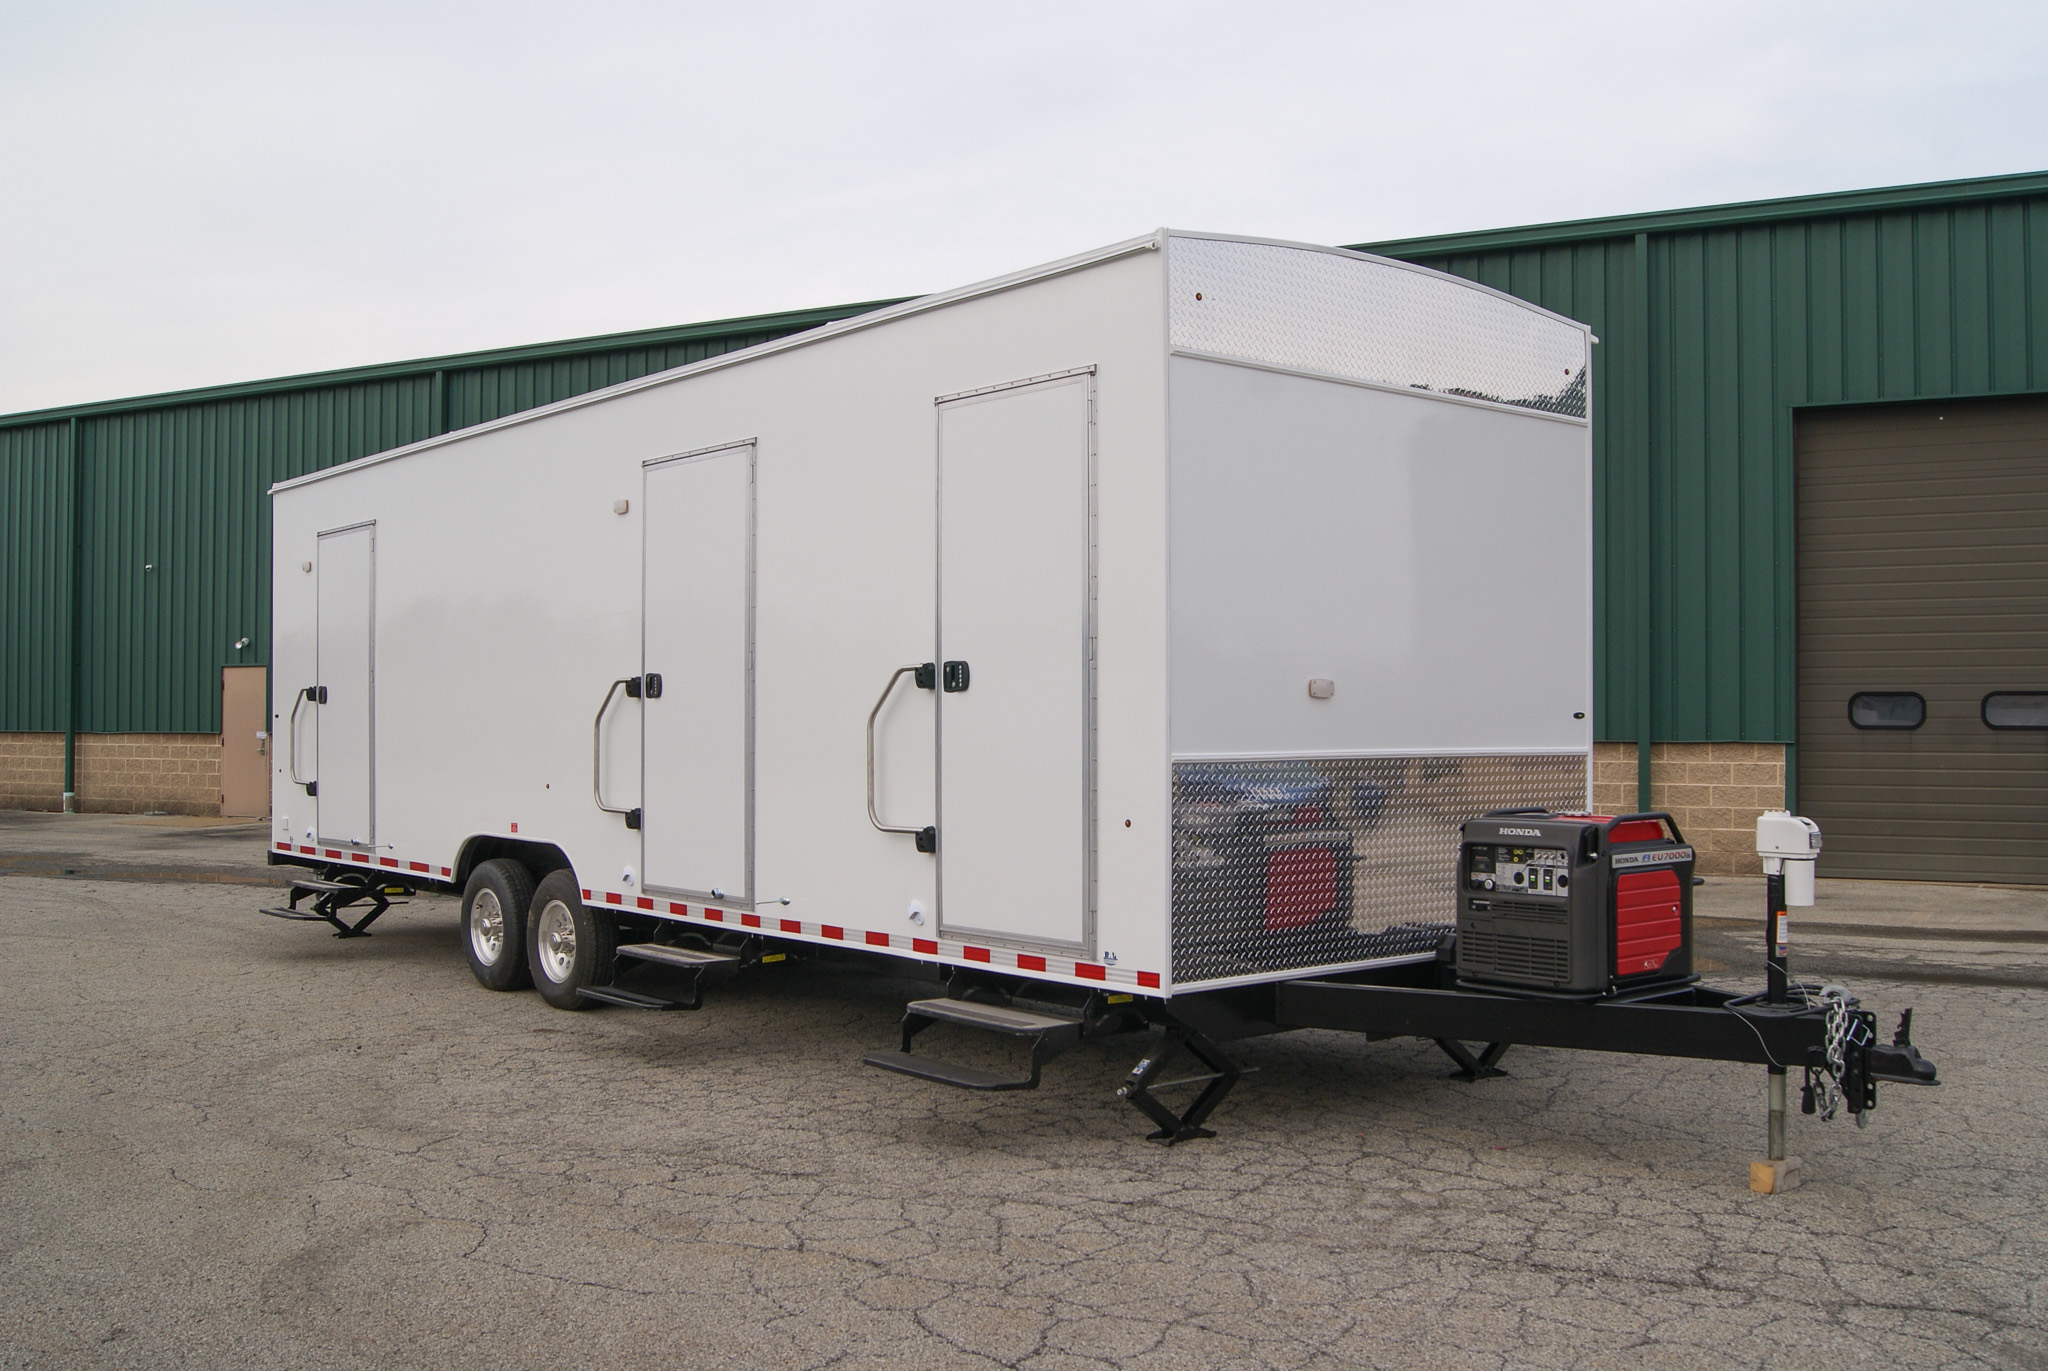 An exterior view of the unit made for Travis County, TX.